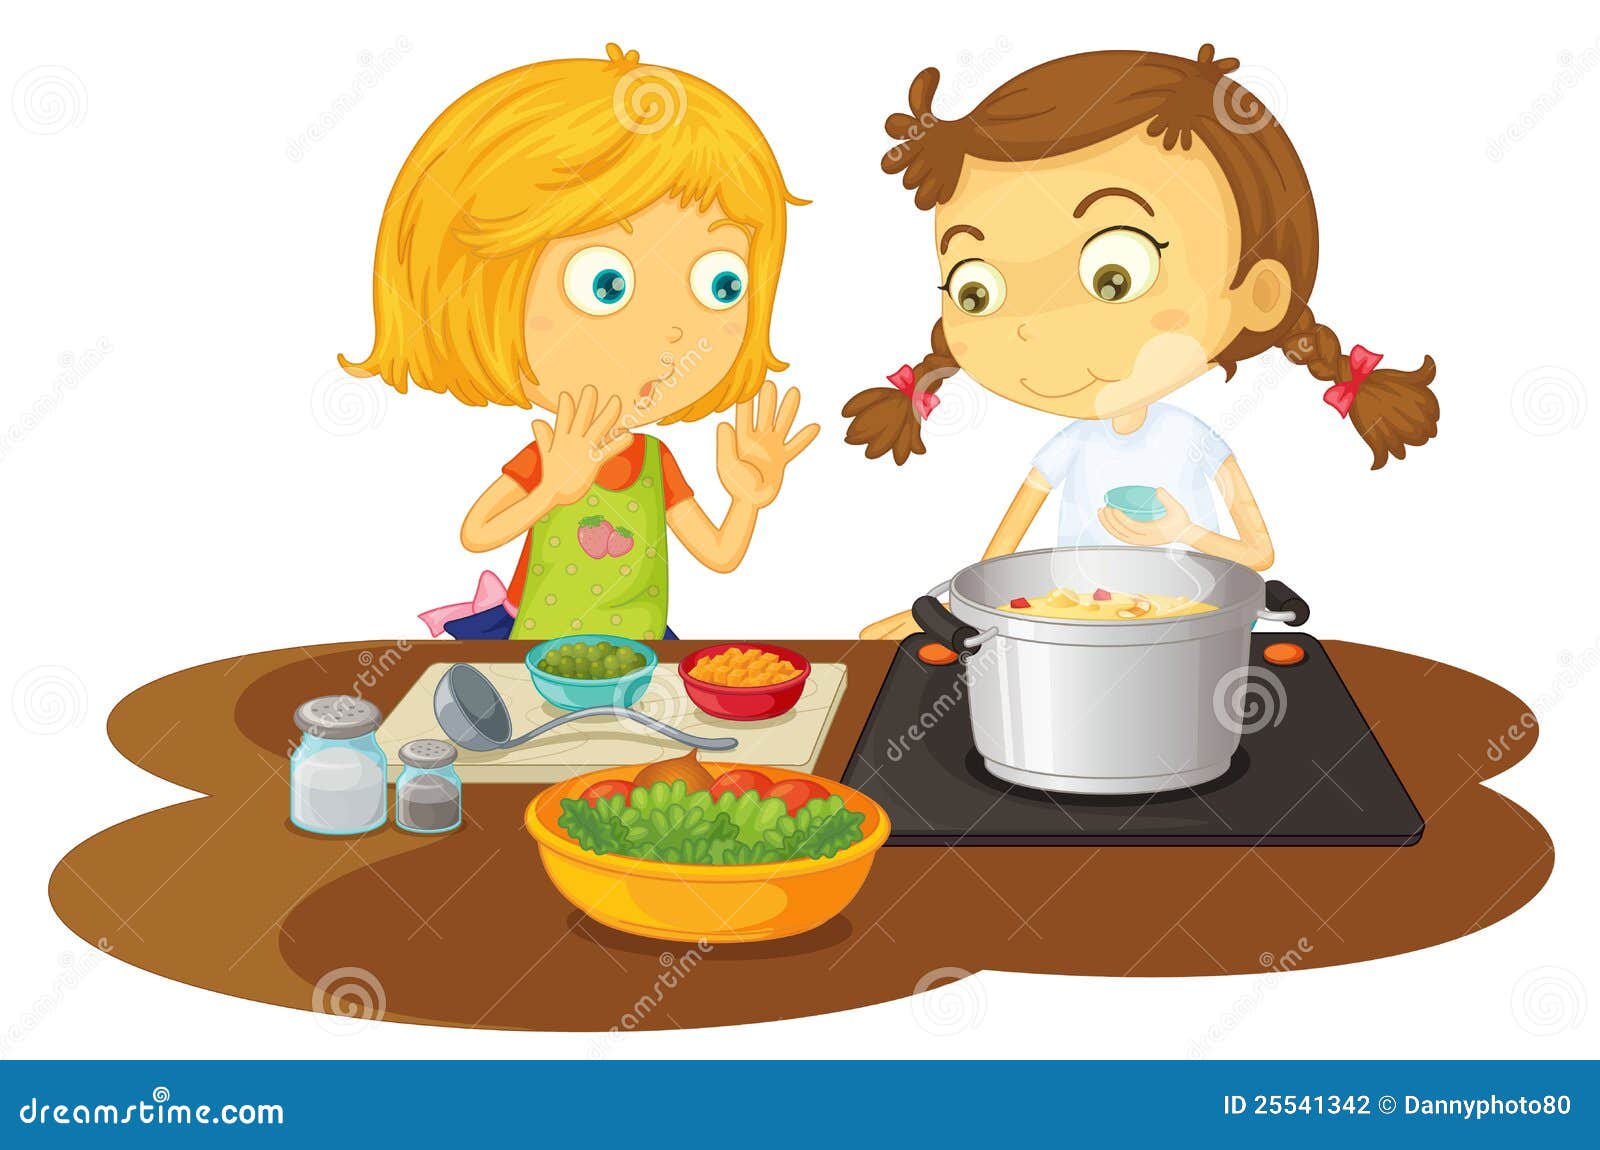 clipart of girl cooking - photo #26